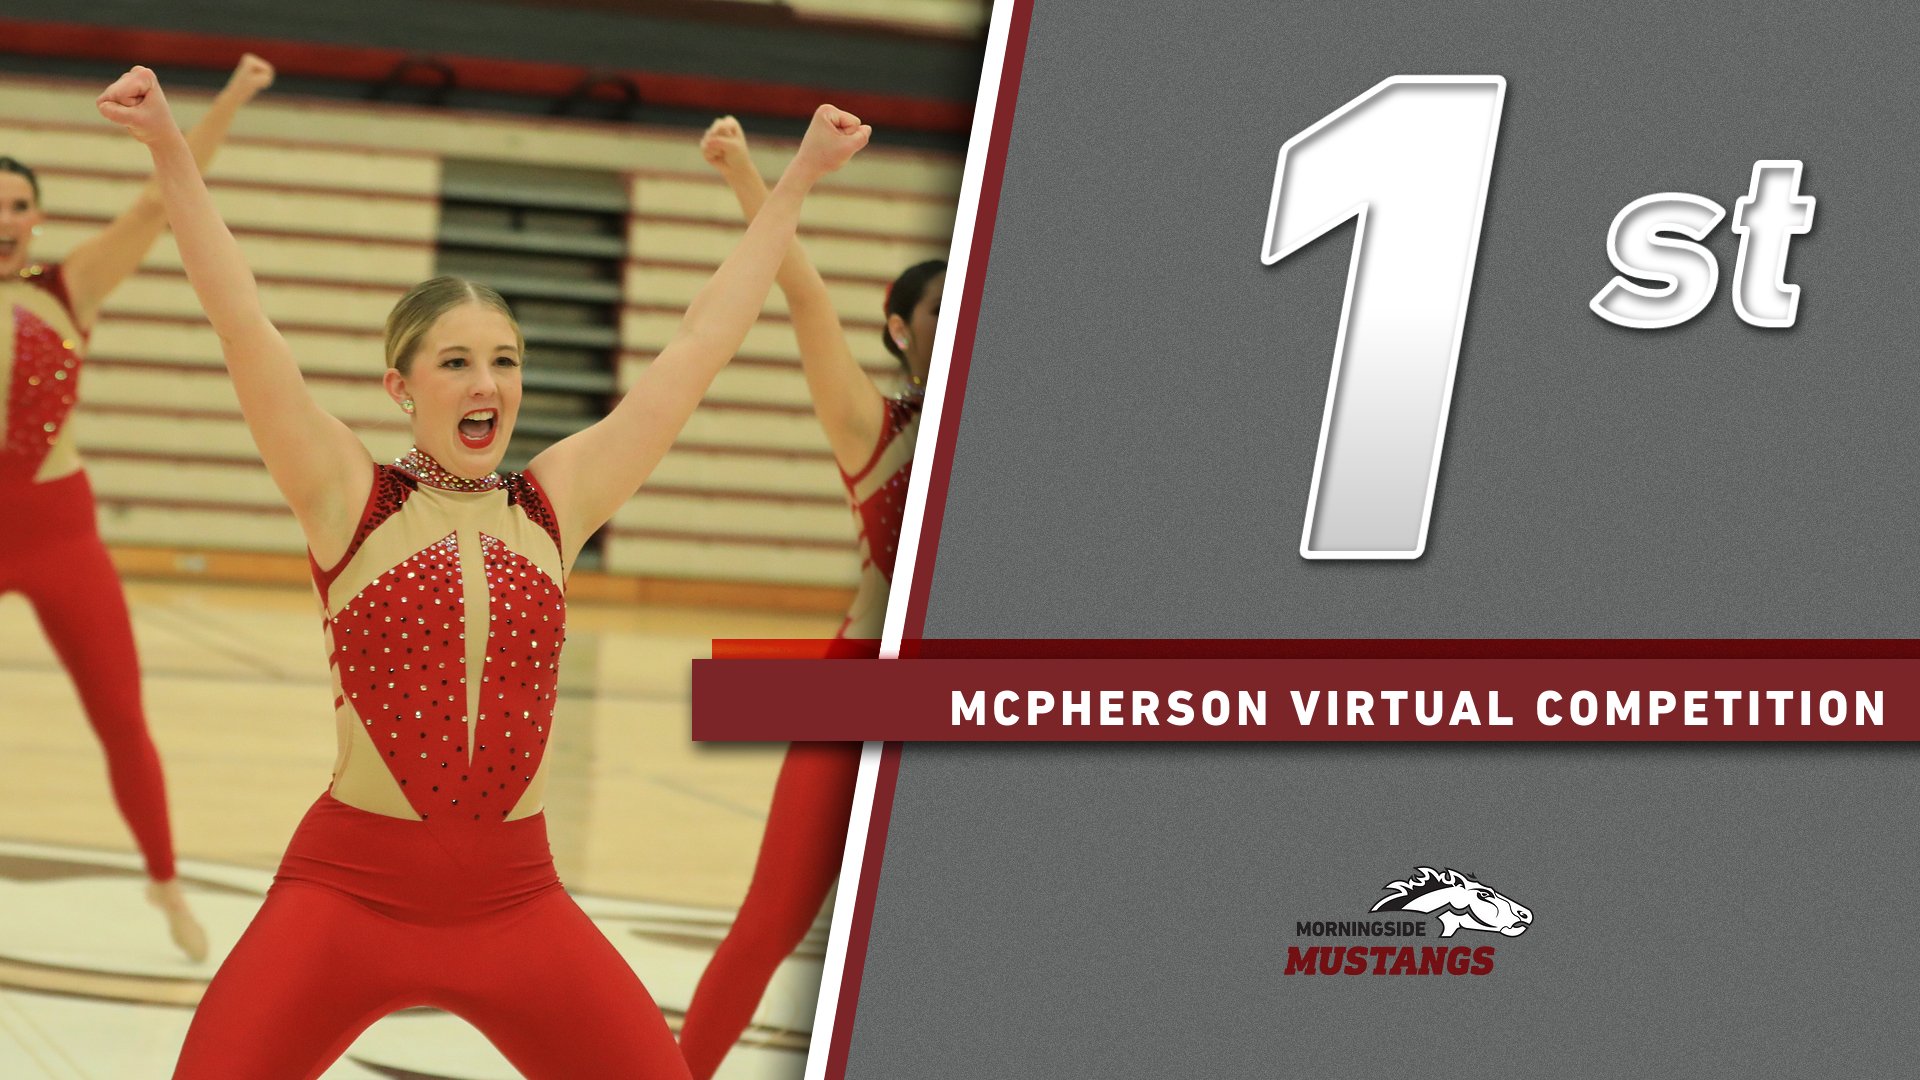 Mustangs take top spot in virtual competition